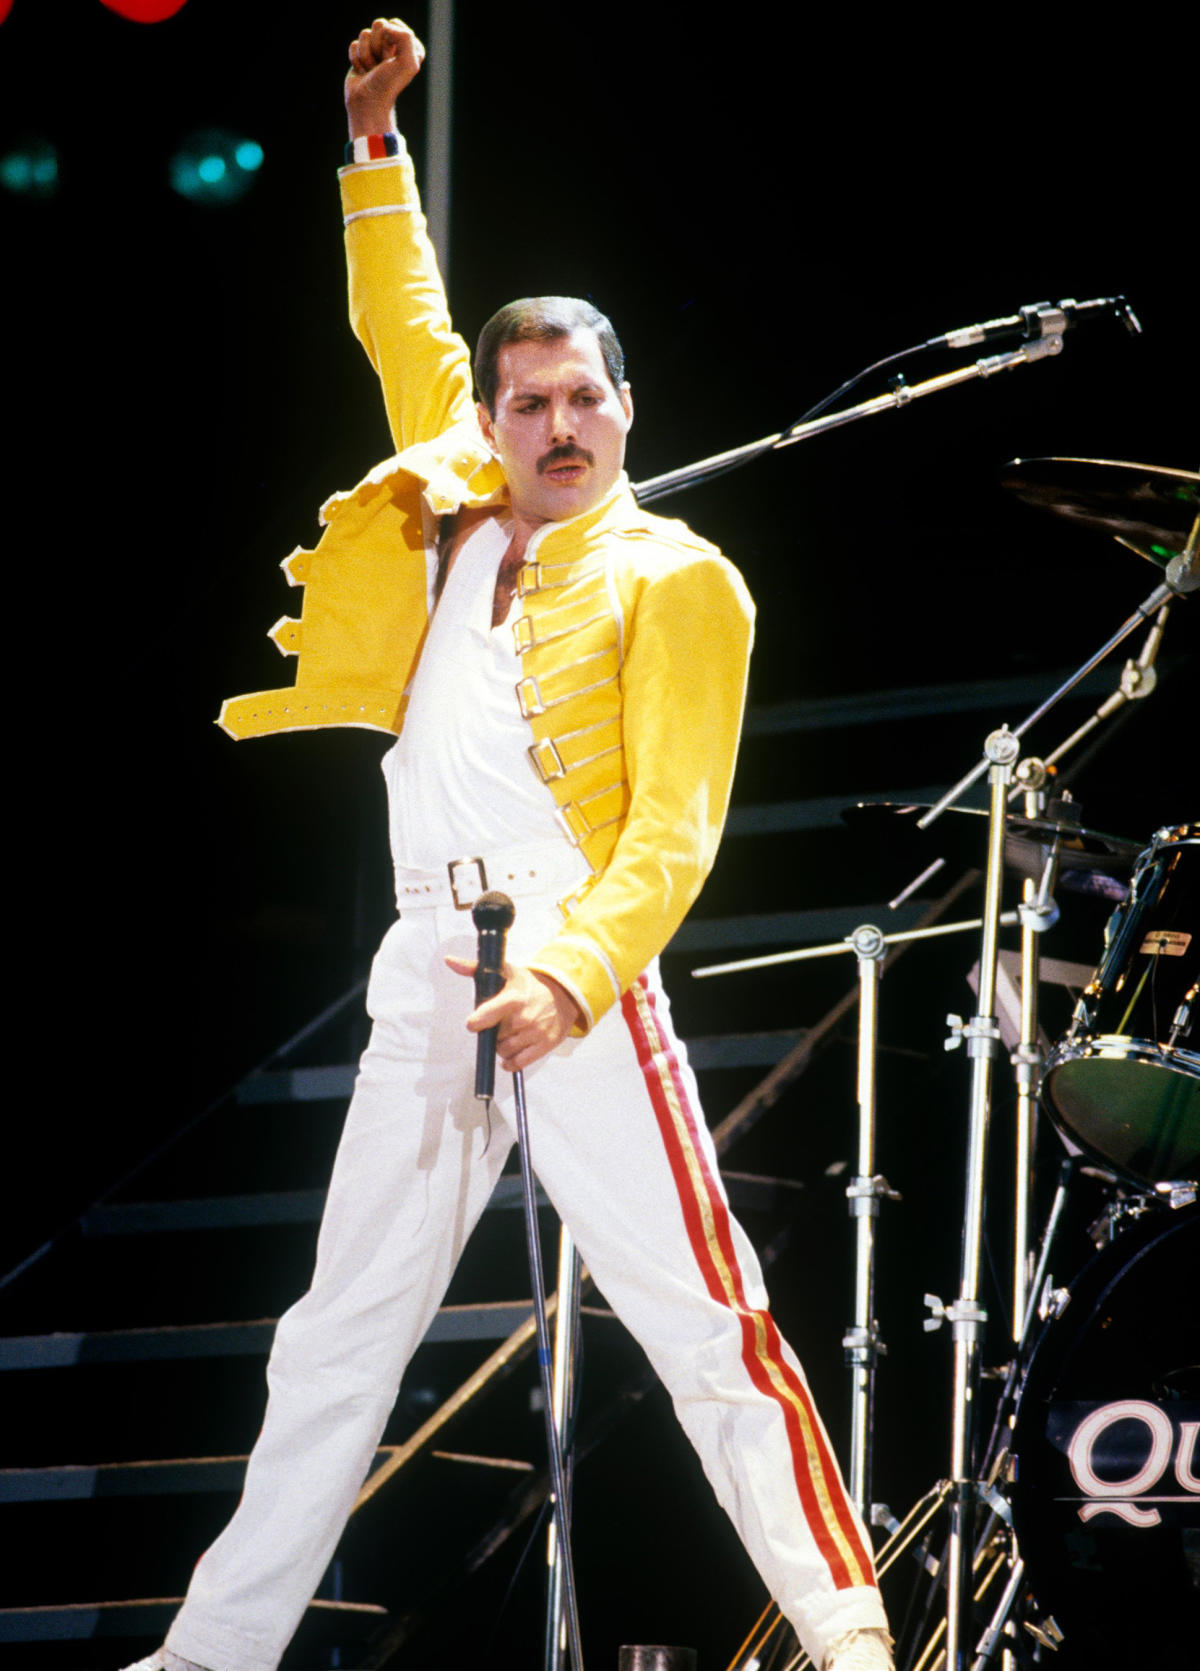 The Unseen Freddie Mercury: Exploring the Private Man Behind the Bohemian  Rhapsody Character